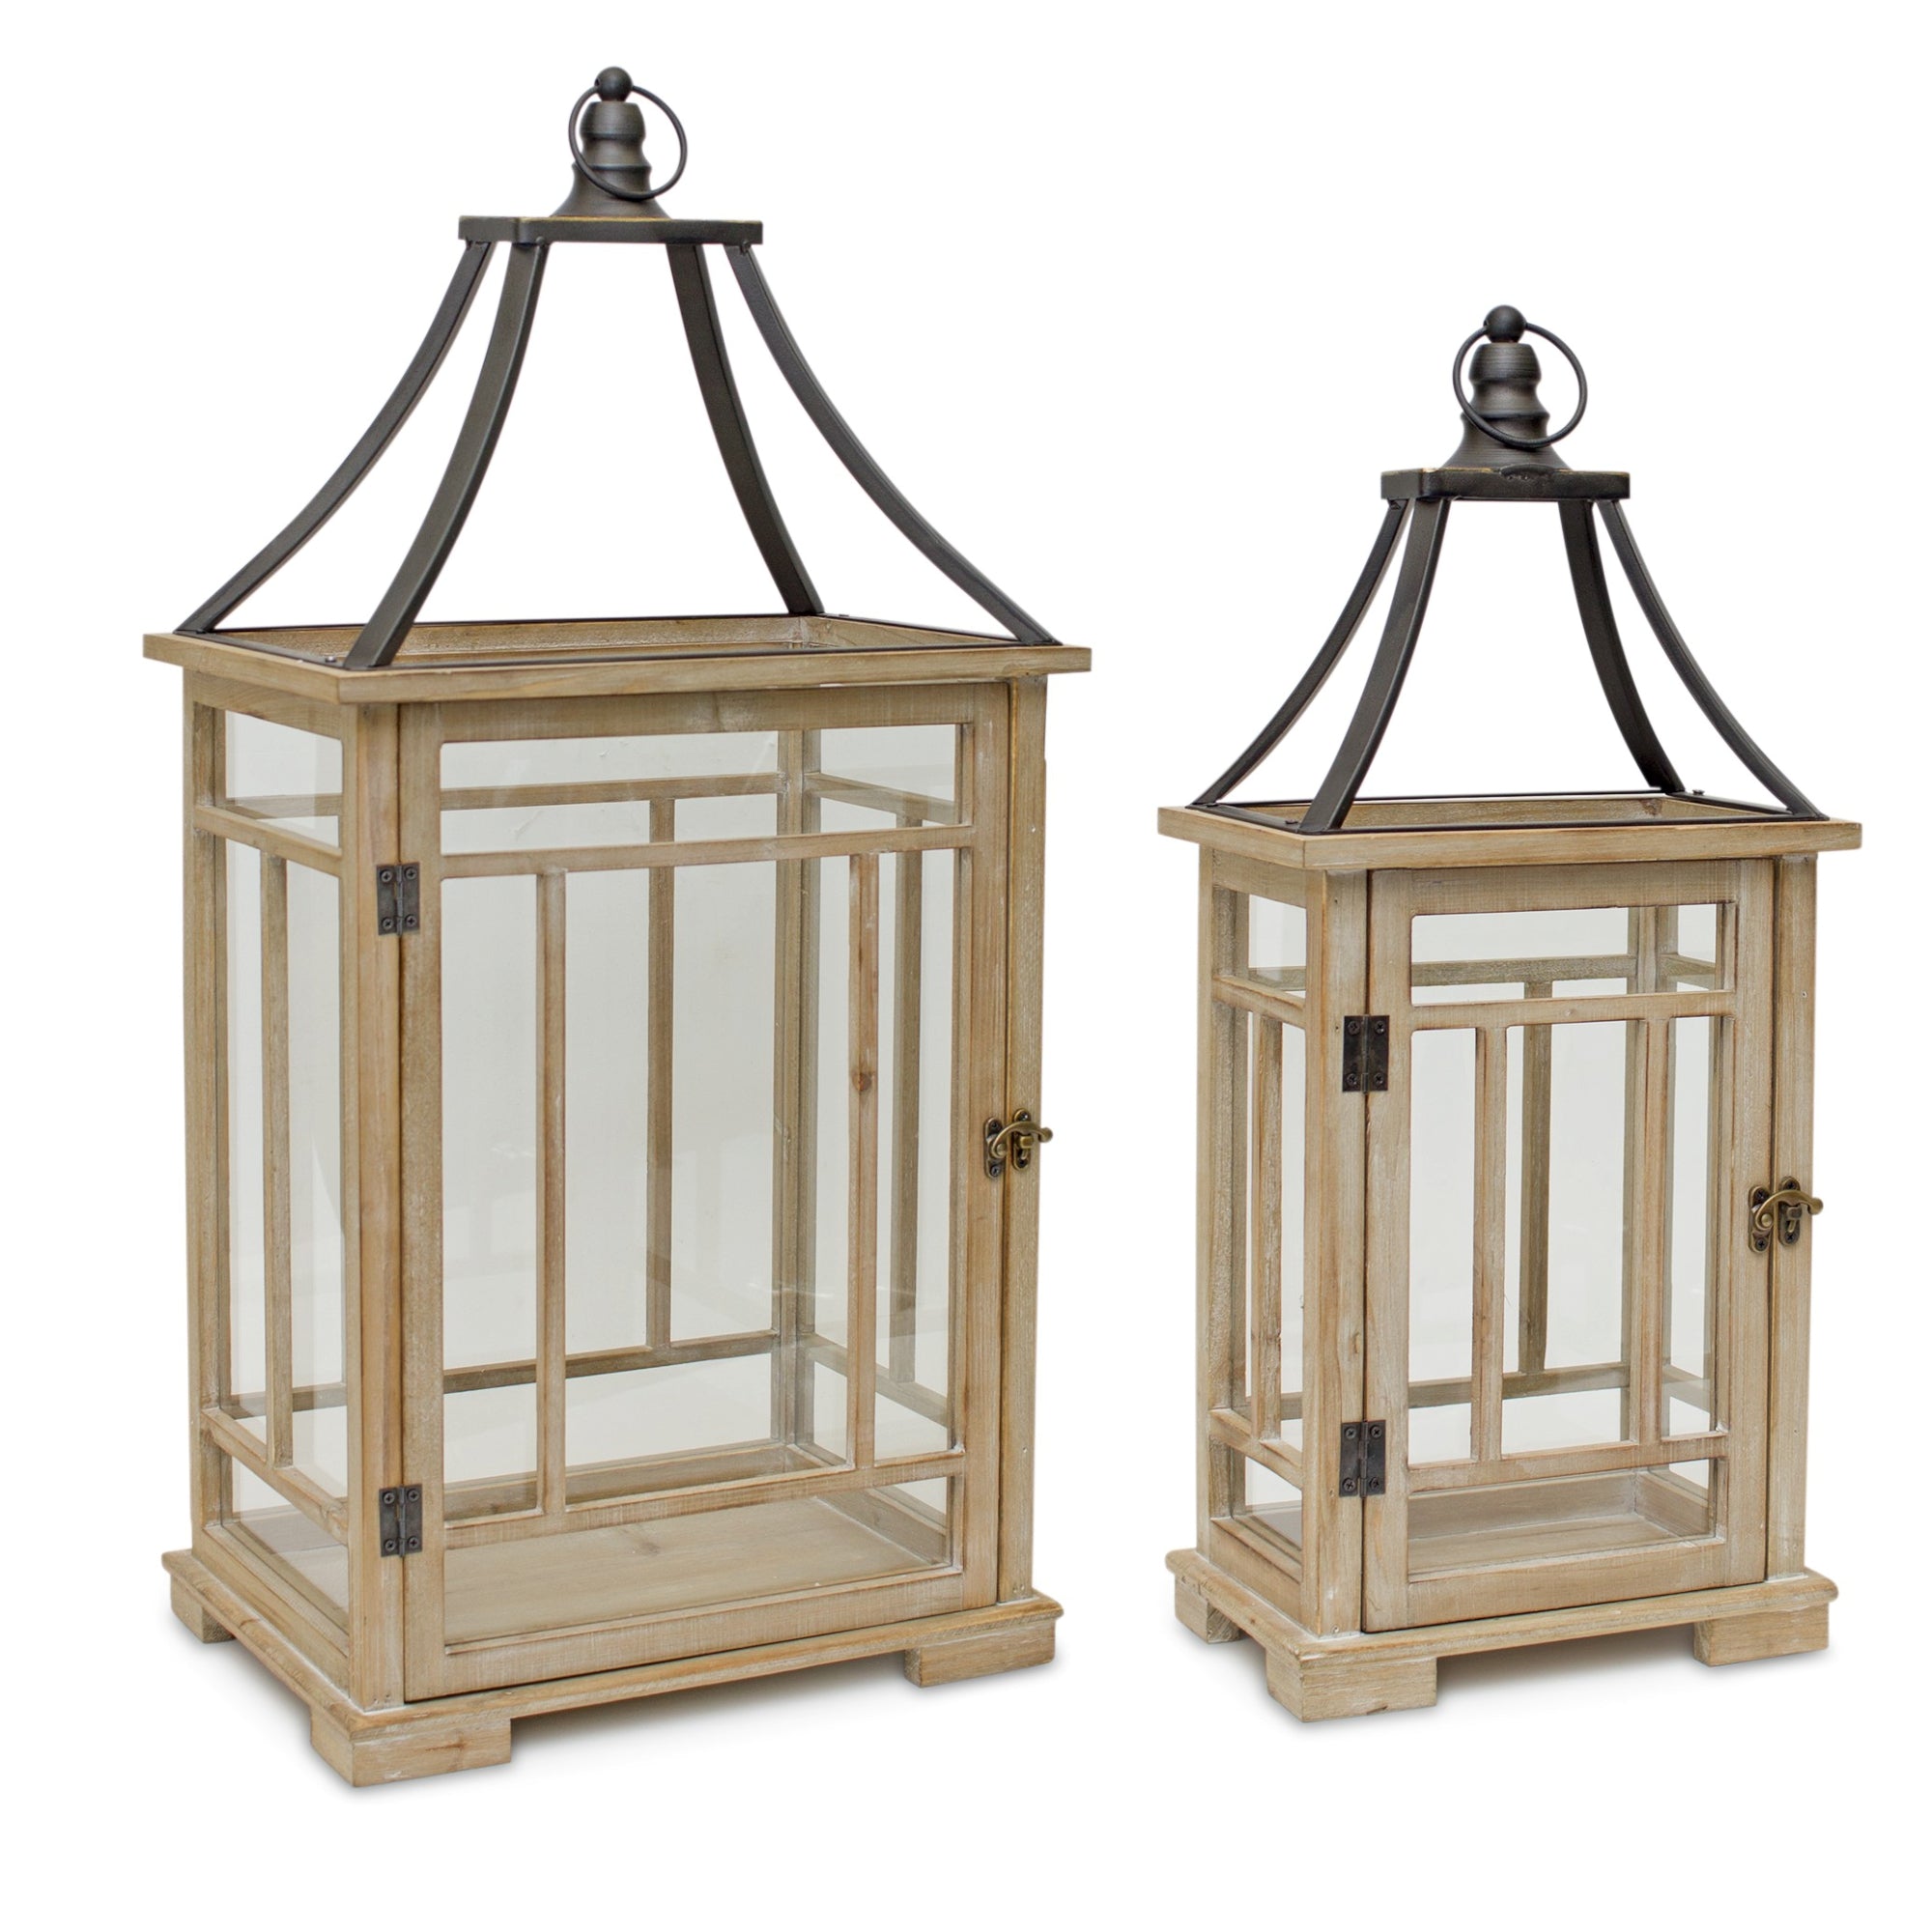 Set-Of-Two-Black-Flameless-Floor-Lantern-Candle-Holder-Candle-Holders